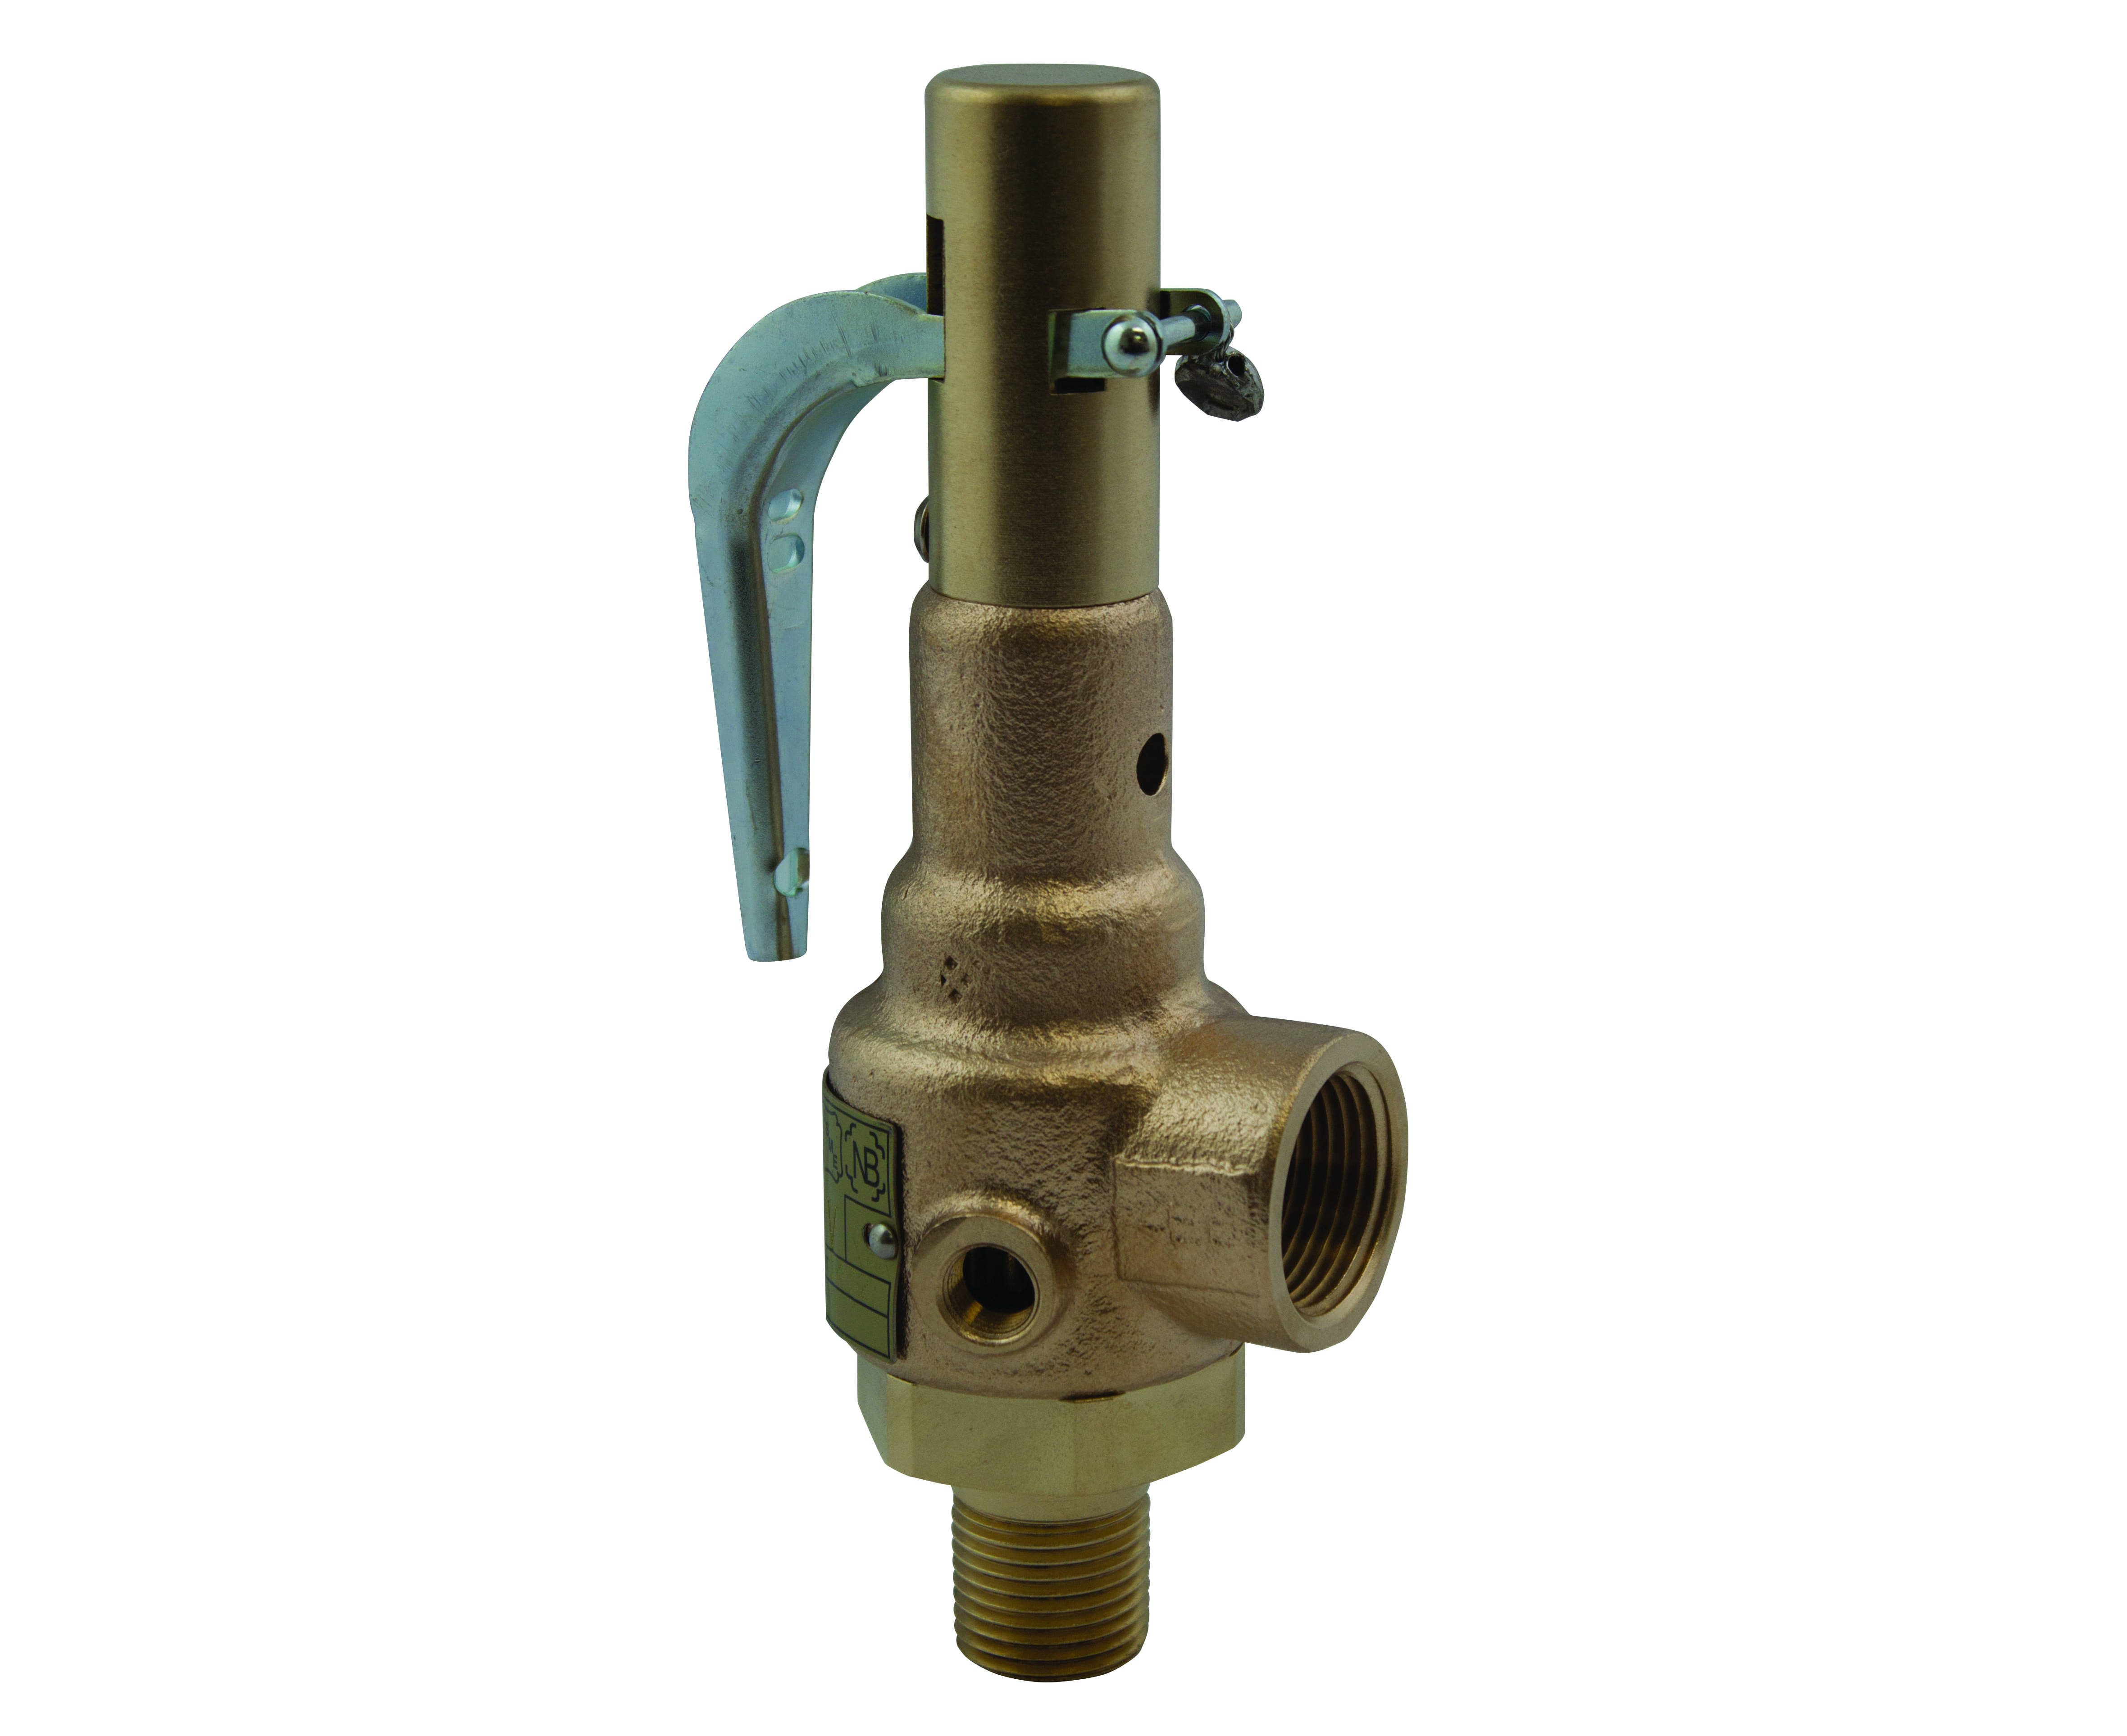 Preview image for Apollo ASME Sec I Steam Bronze Safety Relief Valves with Brass Trim, Teflon Seat, CE/PED Compliant, Performance Test Reports Included, 1-1/2" x 2" (MNPT x FNPT)